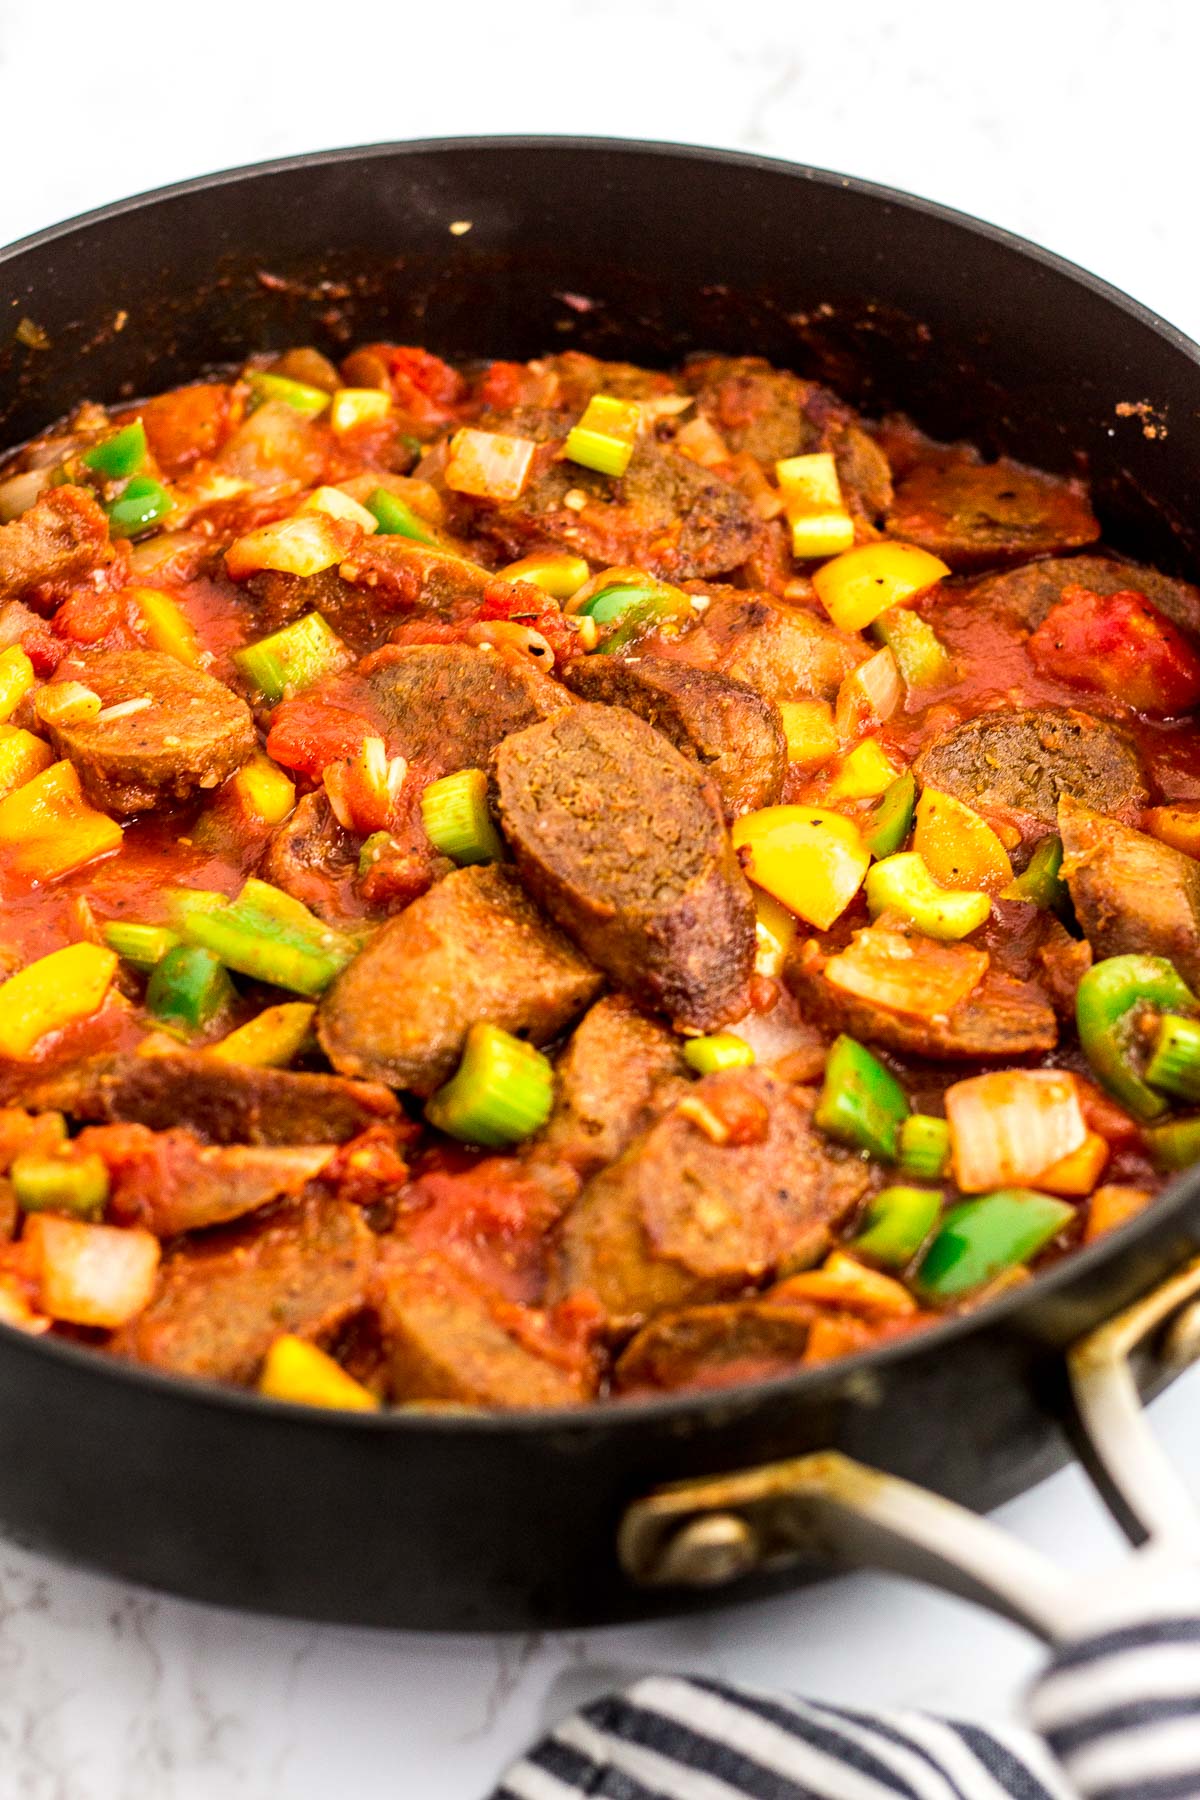 cooked vegan sausage added to the creole sauce